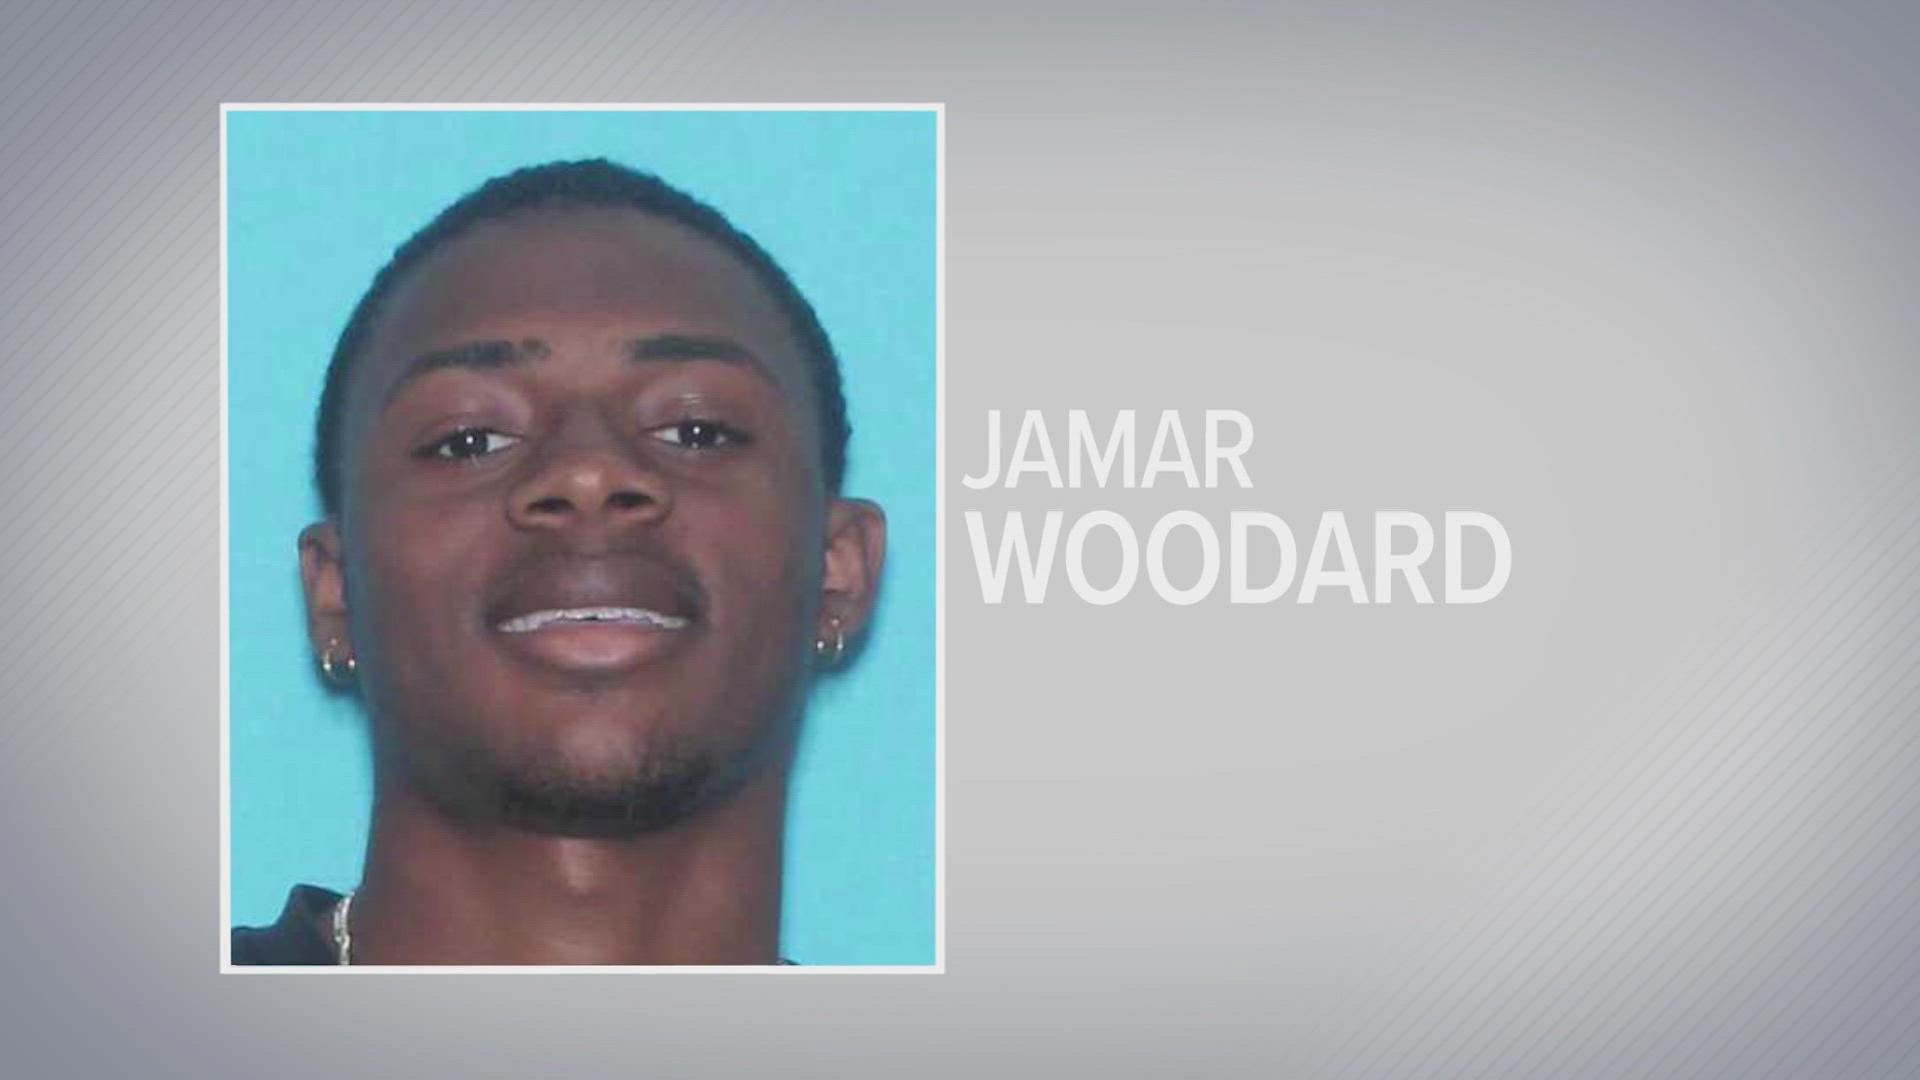 Cardarius Jamar Woodard, 22, is charged with murder in the shooting of a maintenance worker on Aug. 11.